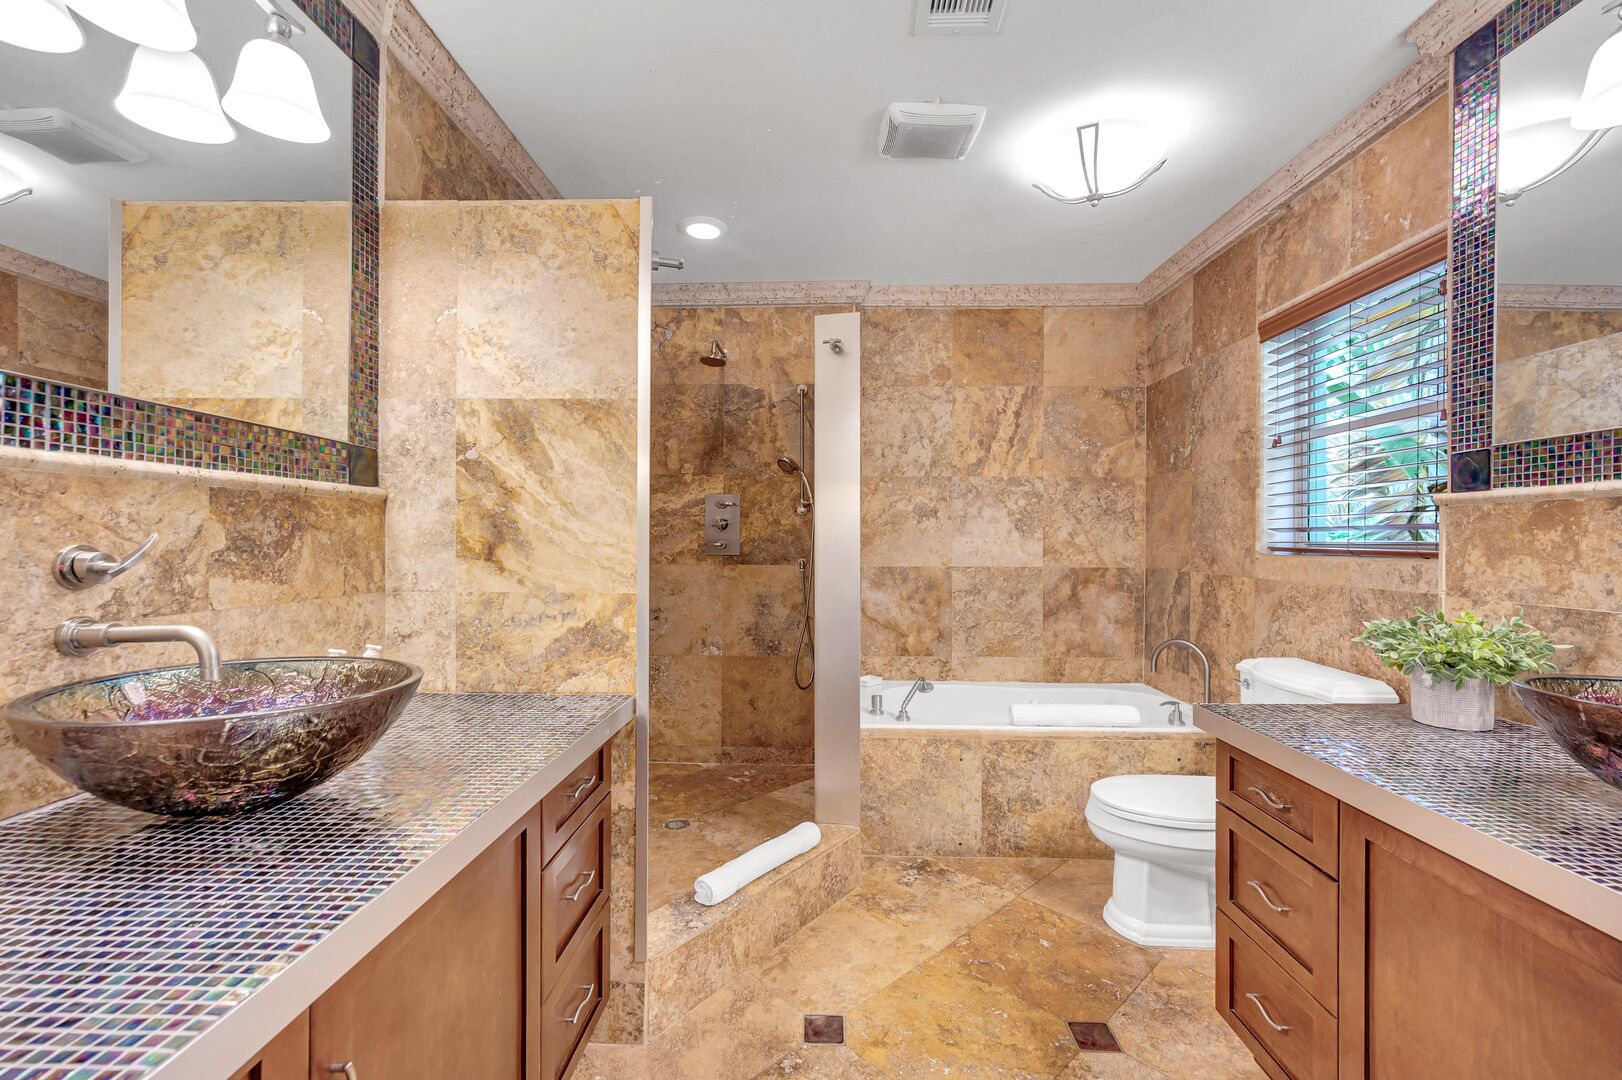 The master bedroom's bathroom features a walk-in shower and a tub.